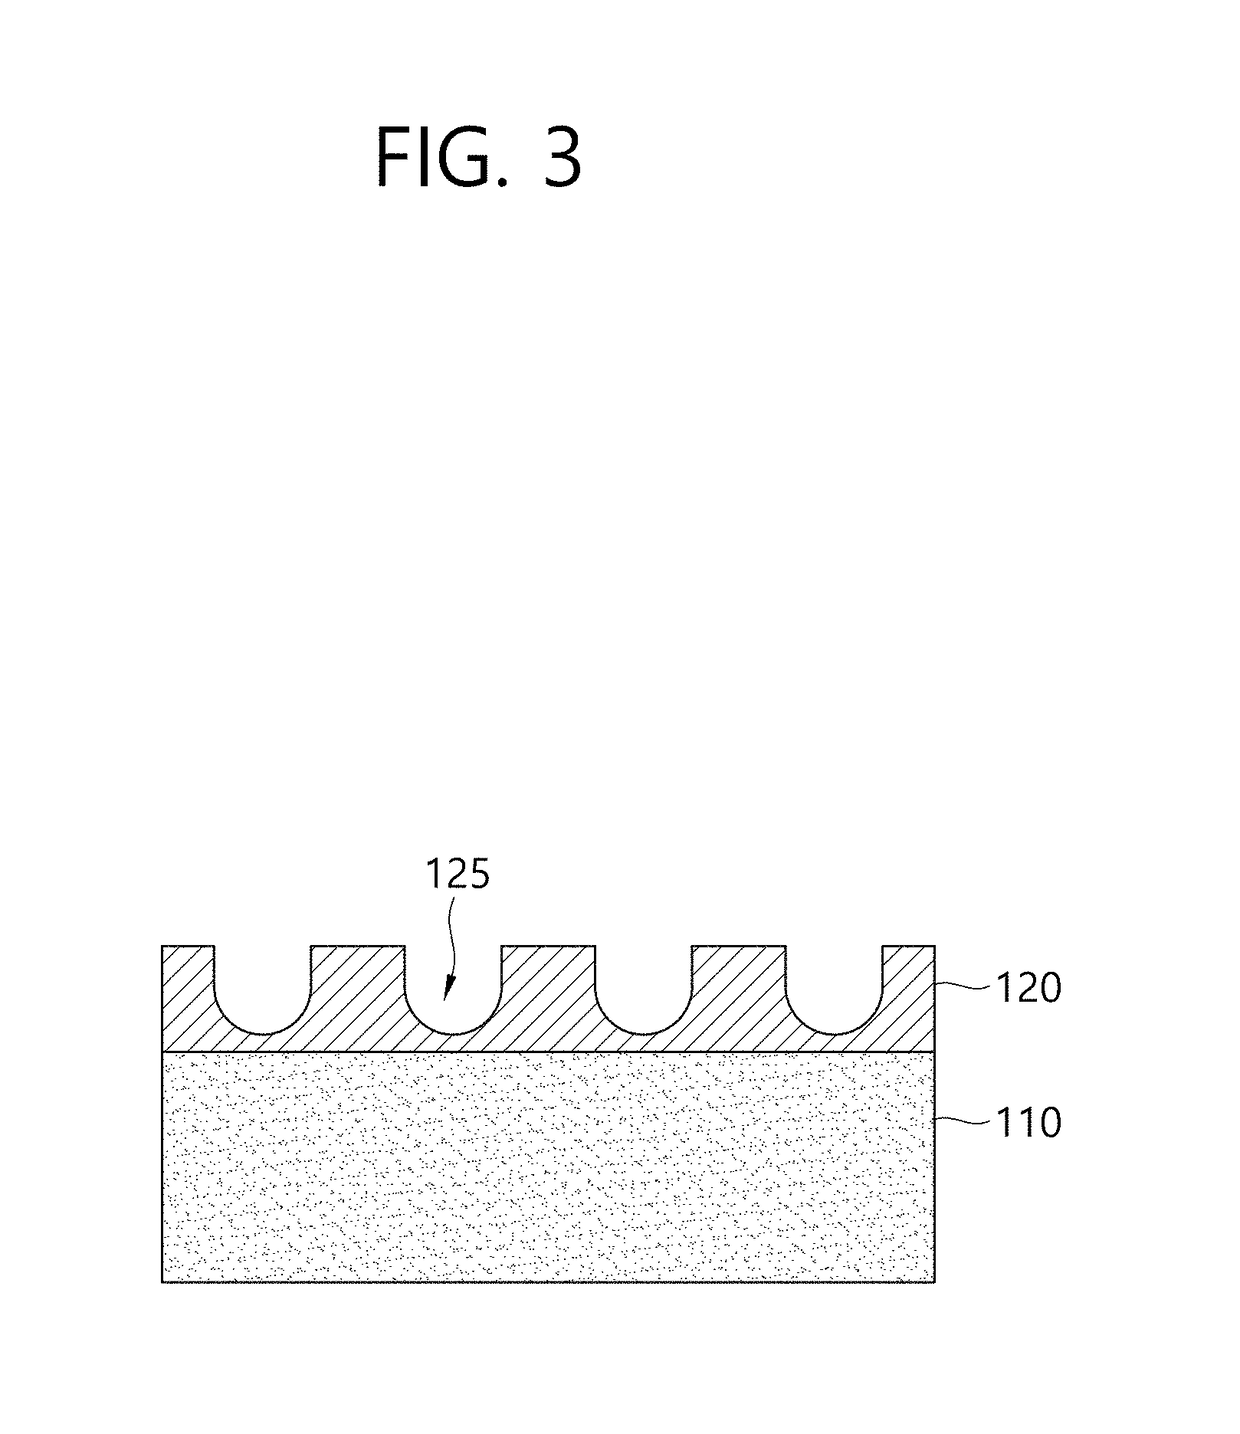 Low-friction member imitating shark skin and manufacturing method therefor